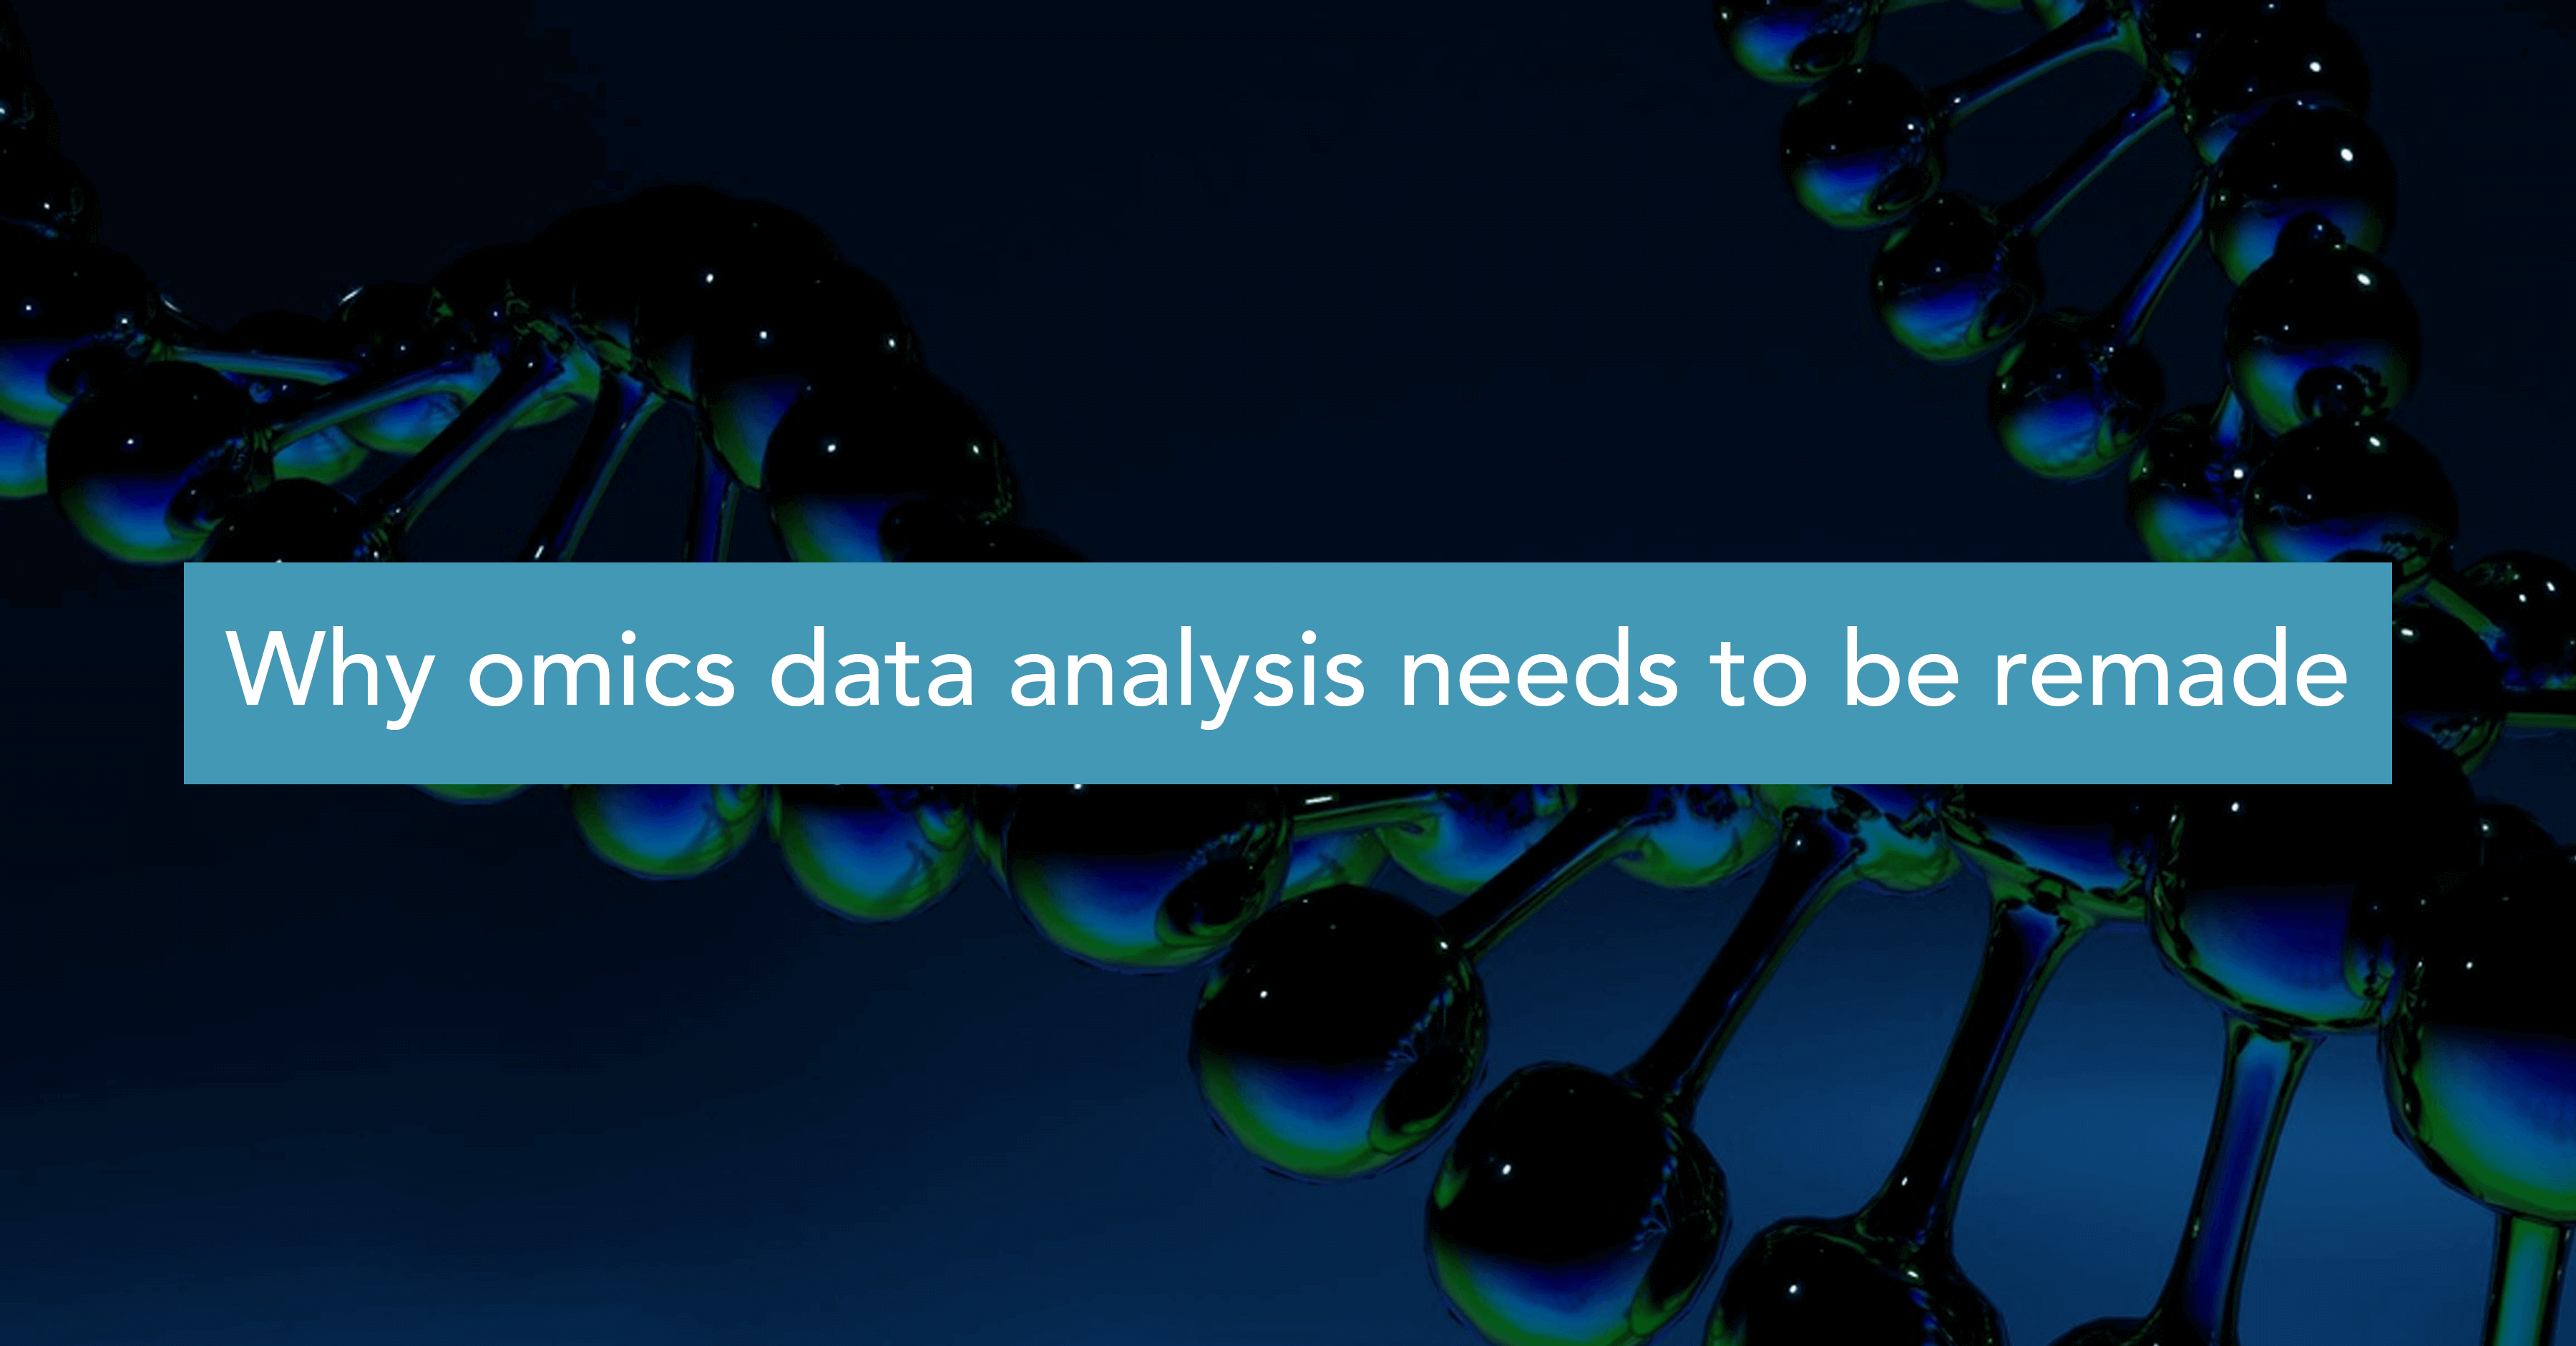 Why omics data analysis needs to be remade